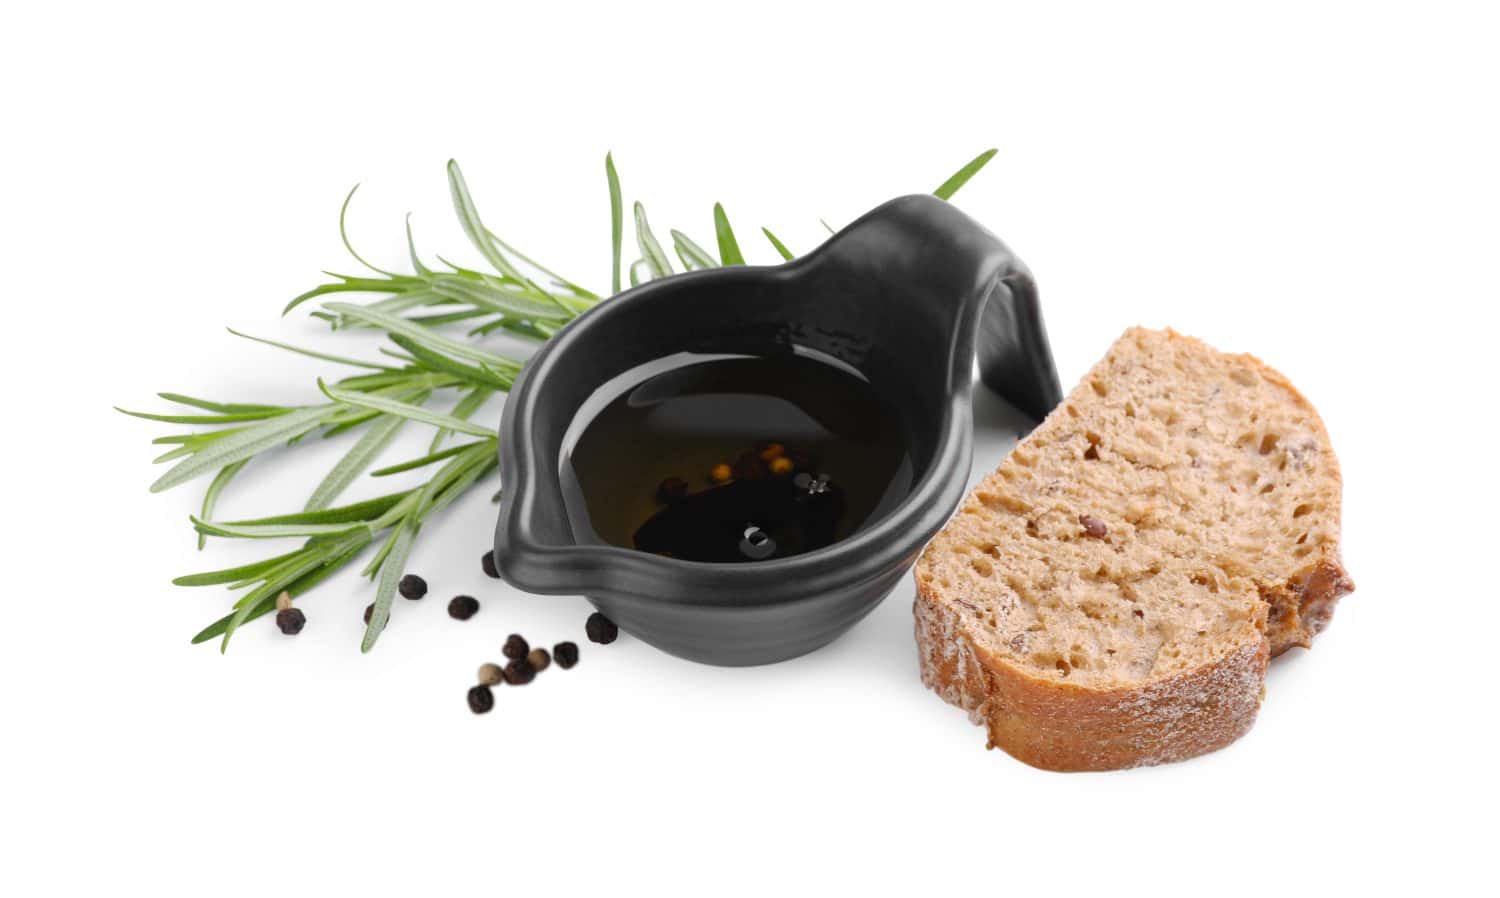 Saucepan of organic balsamic vinegar with oil, spices and bread slices isolated on white